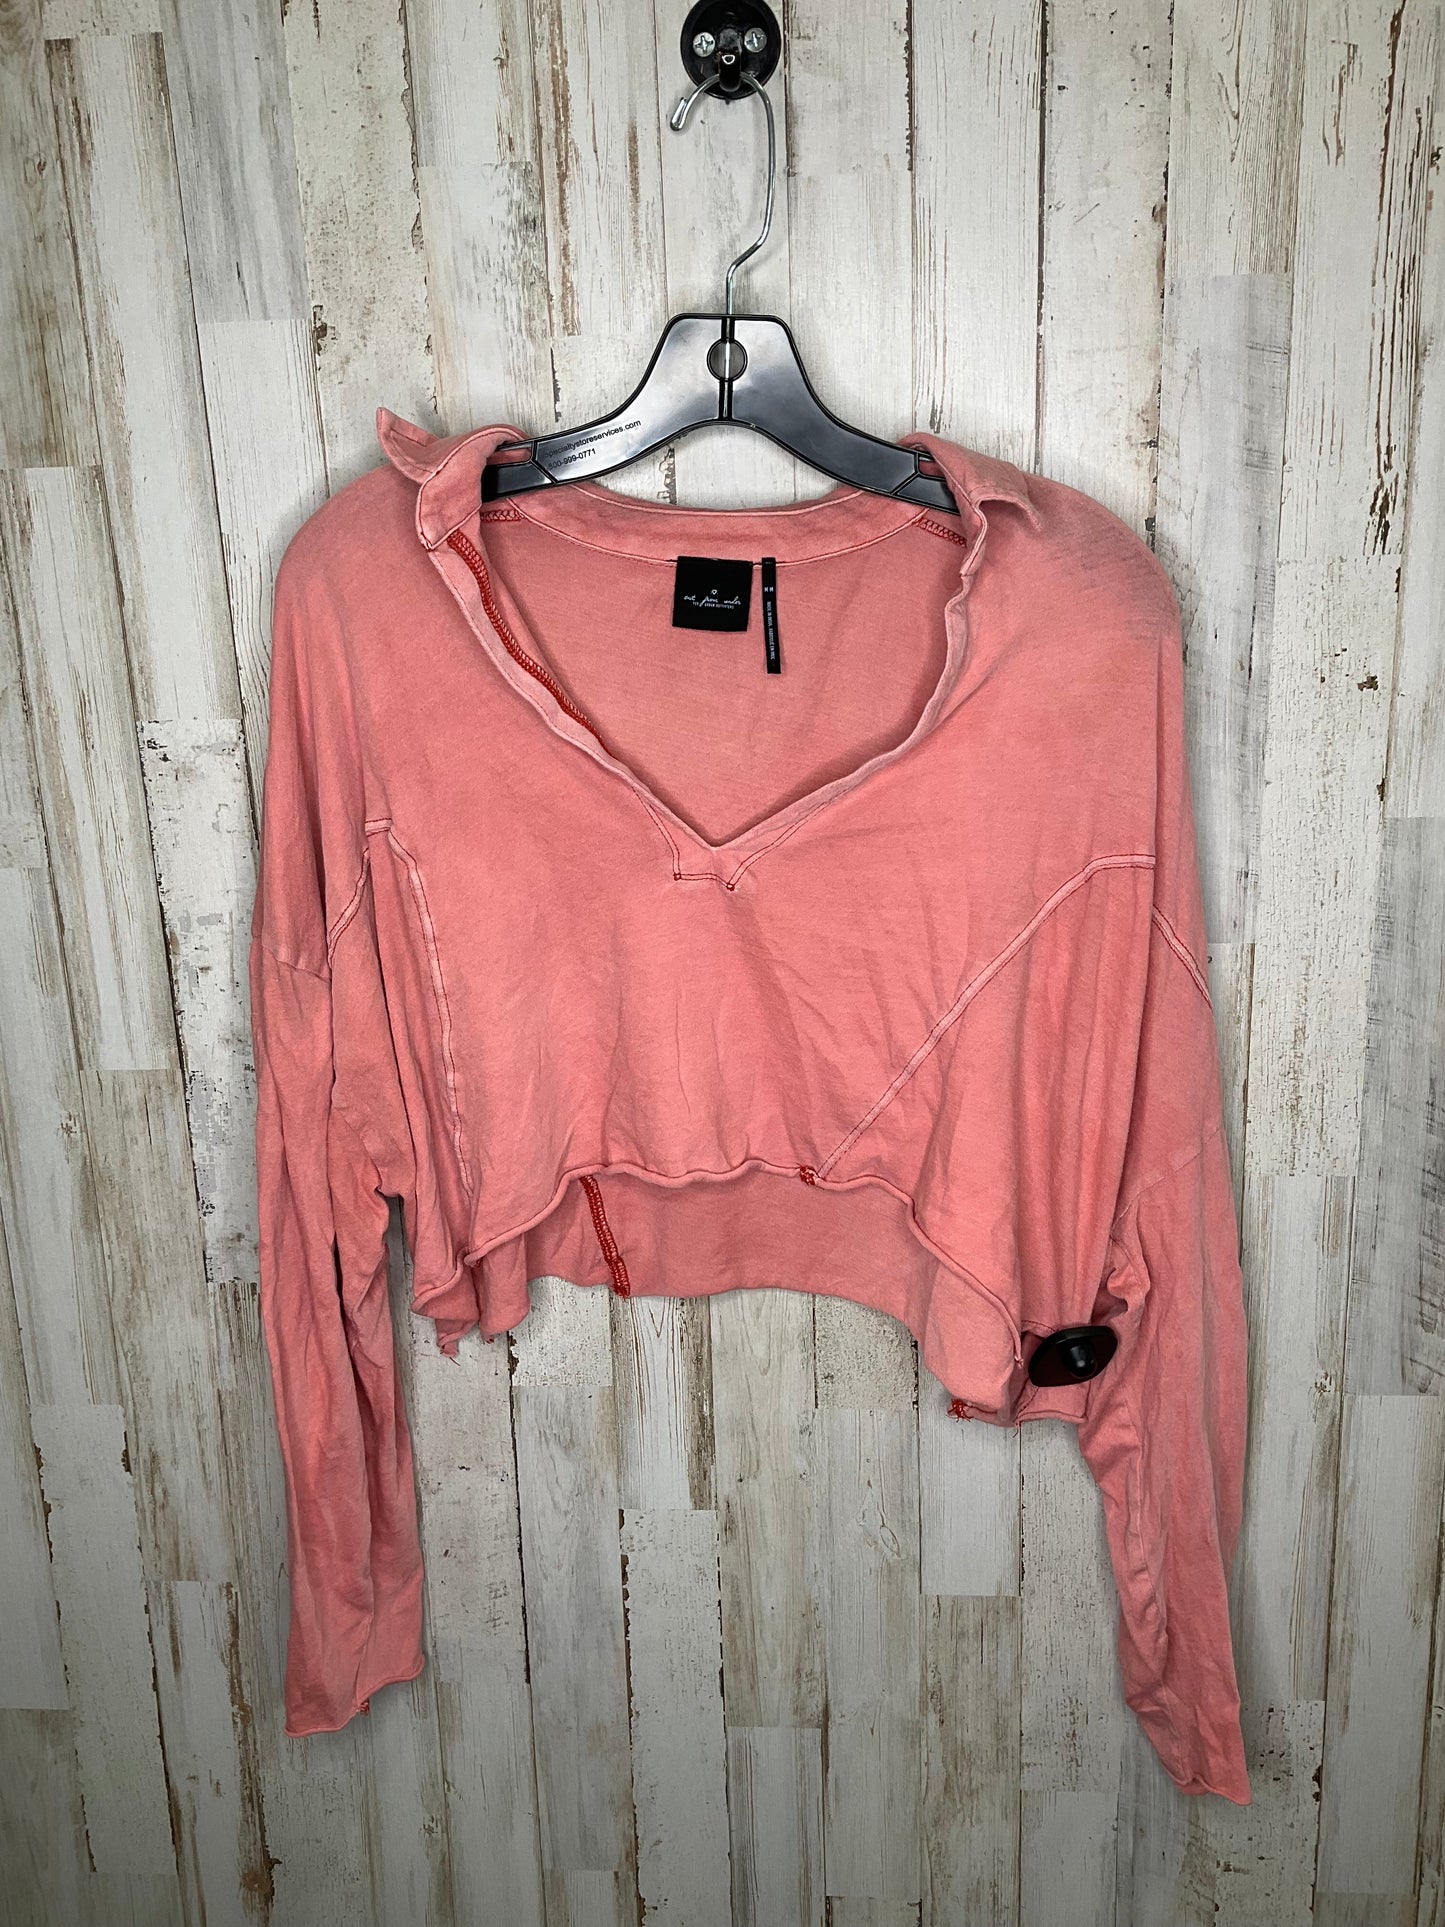 Coral Top Long Sleeve Urban Outfitters, Size M